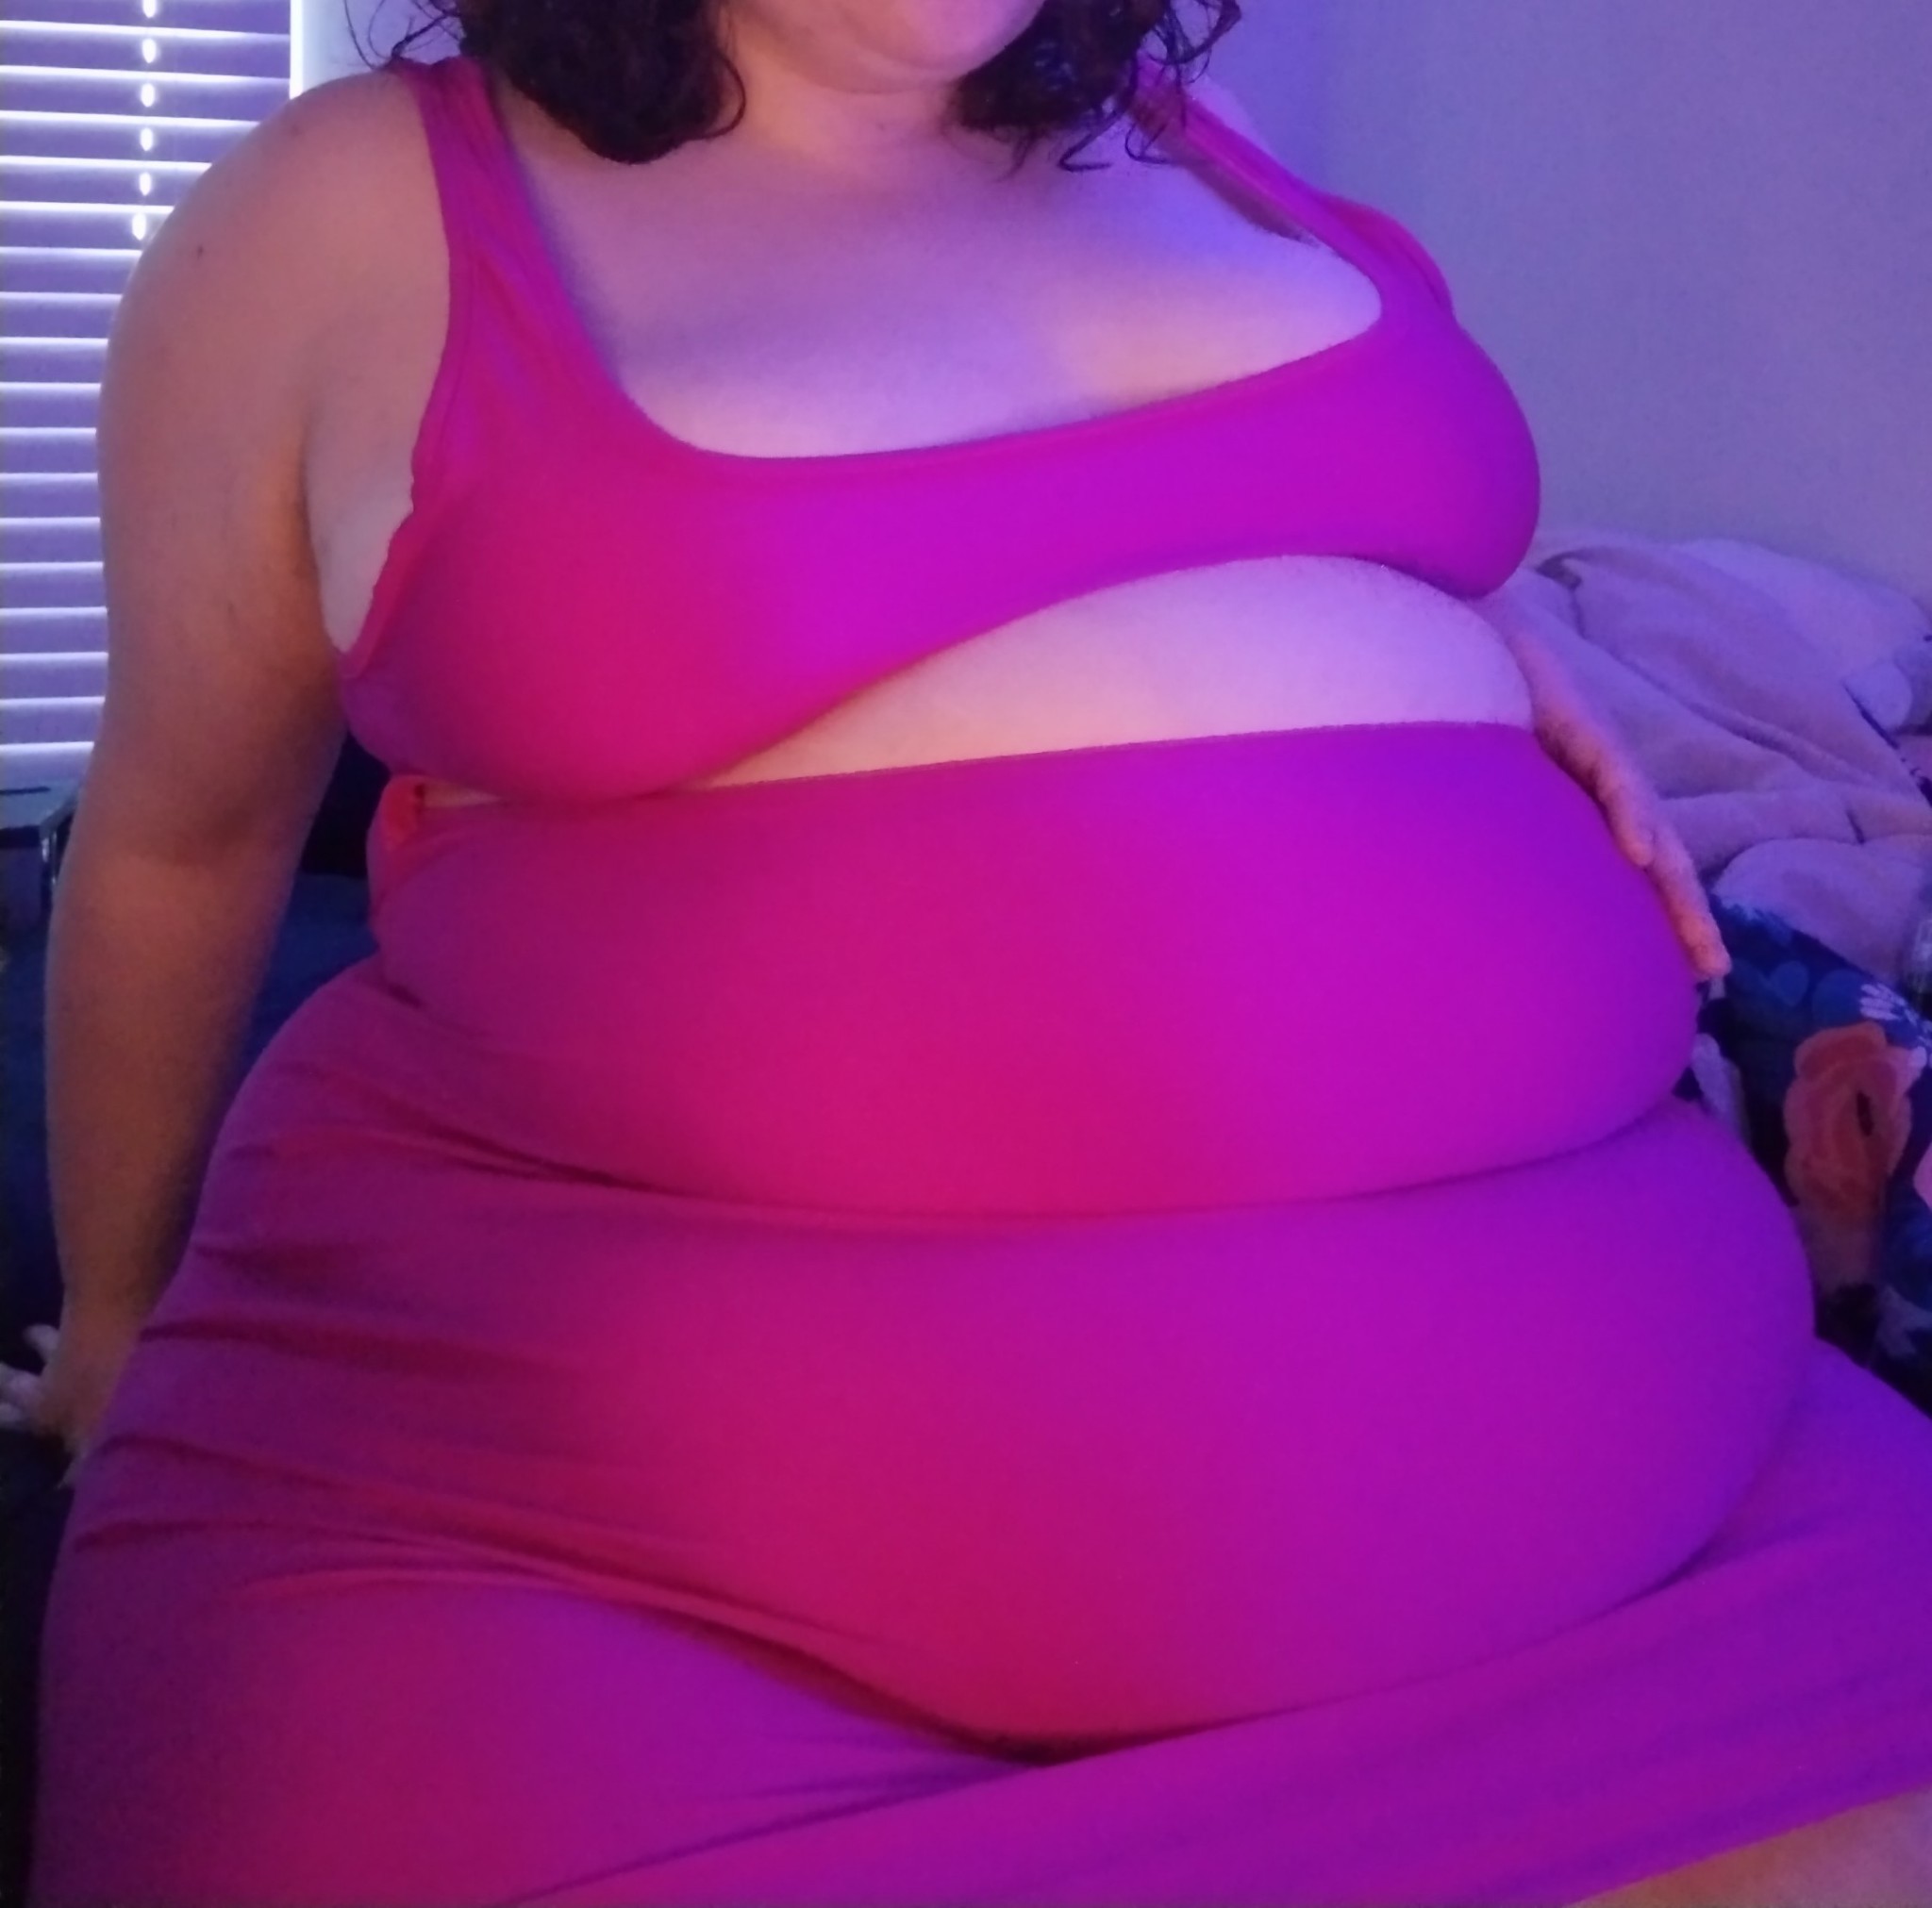 Porn Pics bellybaby98:Babe, I think this dress is getting